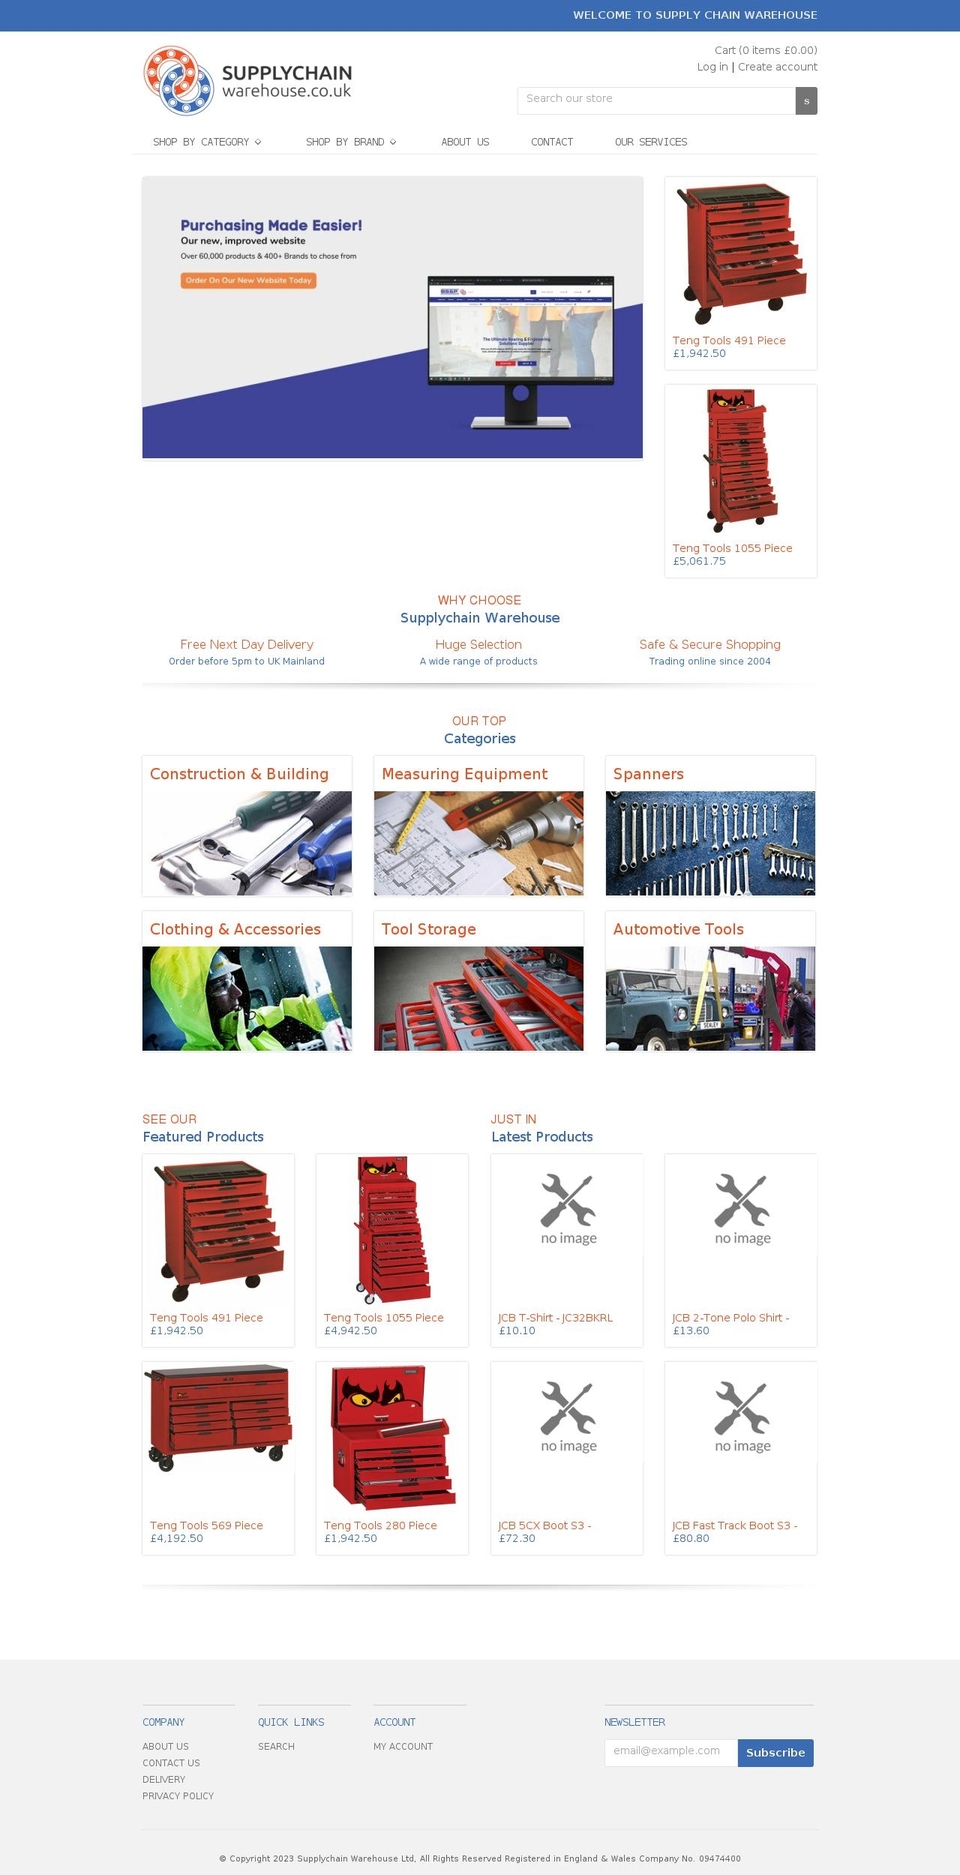 Timber Shopify theme site example supplychainwarehouse.com